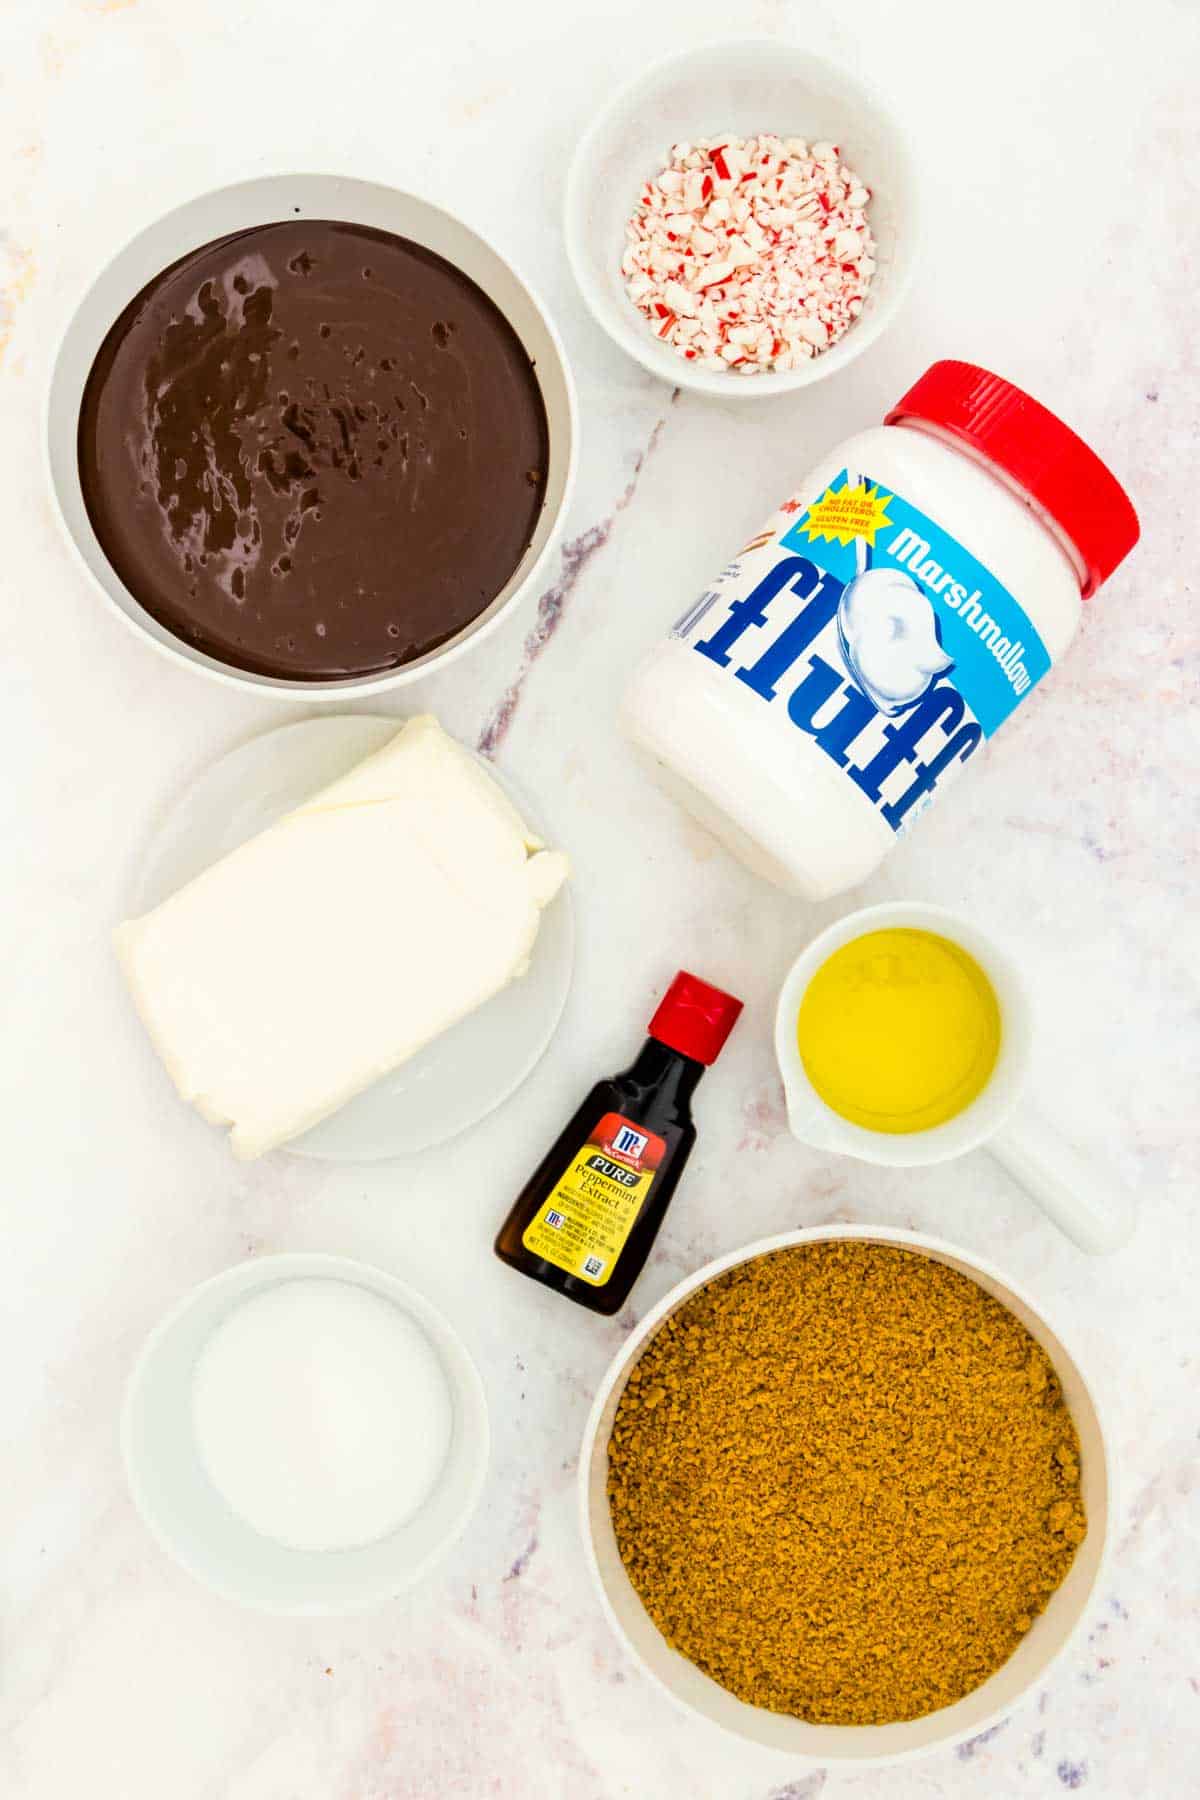 Ingredients to make no-bake chocolate peppermint cheesecake in bowls on a marble countertop.